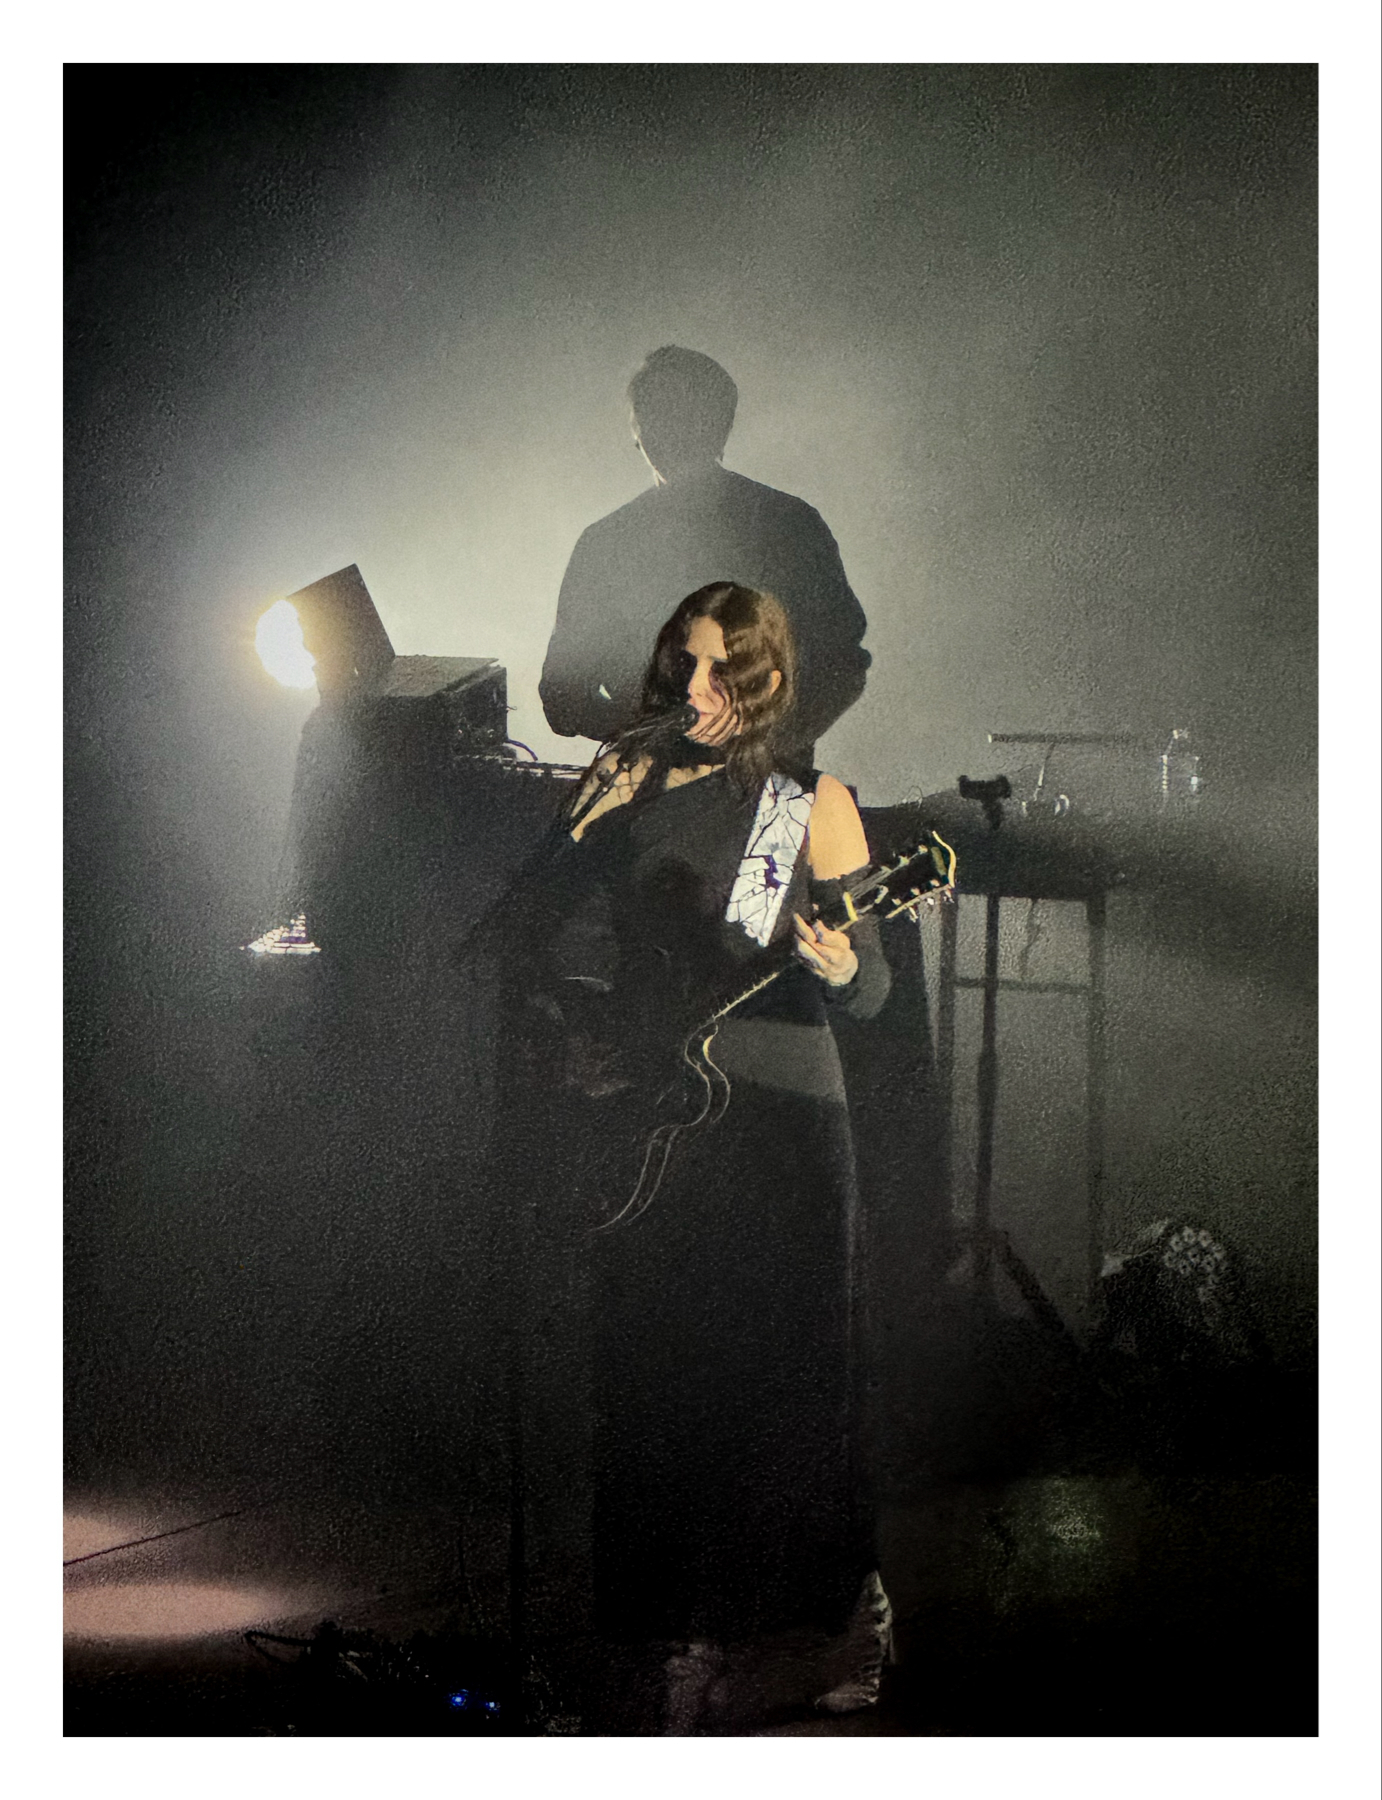 Chelsea Wolfe playing an electric guitar on stage with moody stage lighting casting their shadow on the wall behind.